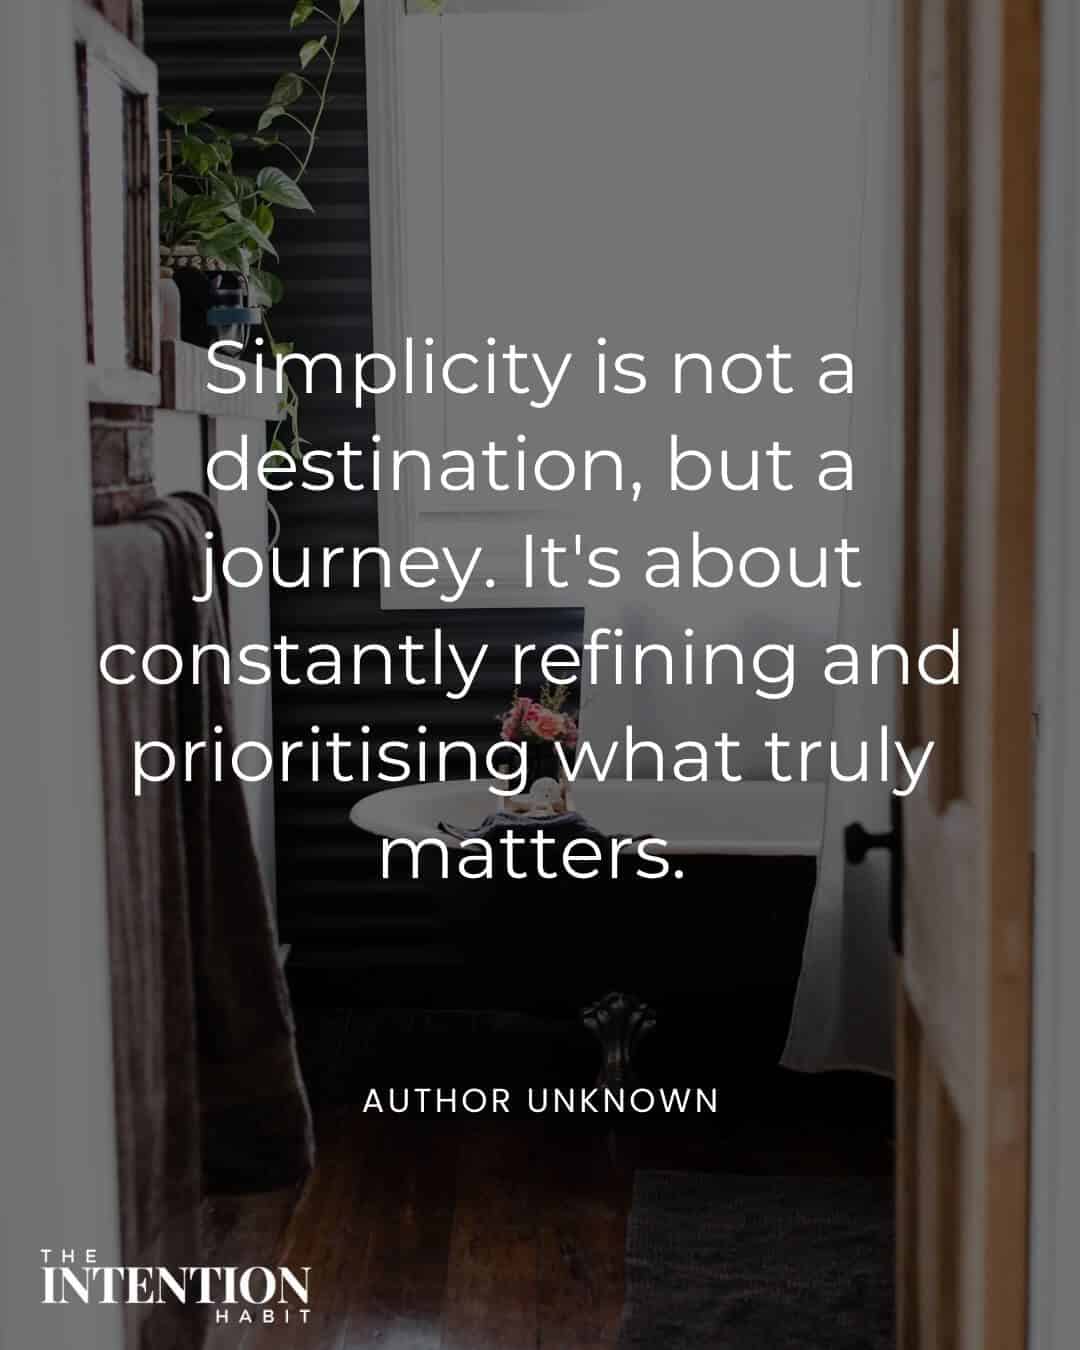 simple living quotes - simplicity is not a destination but a journey it's about constantly refining and prioritising what truly matters